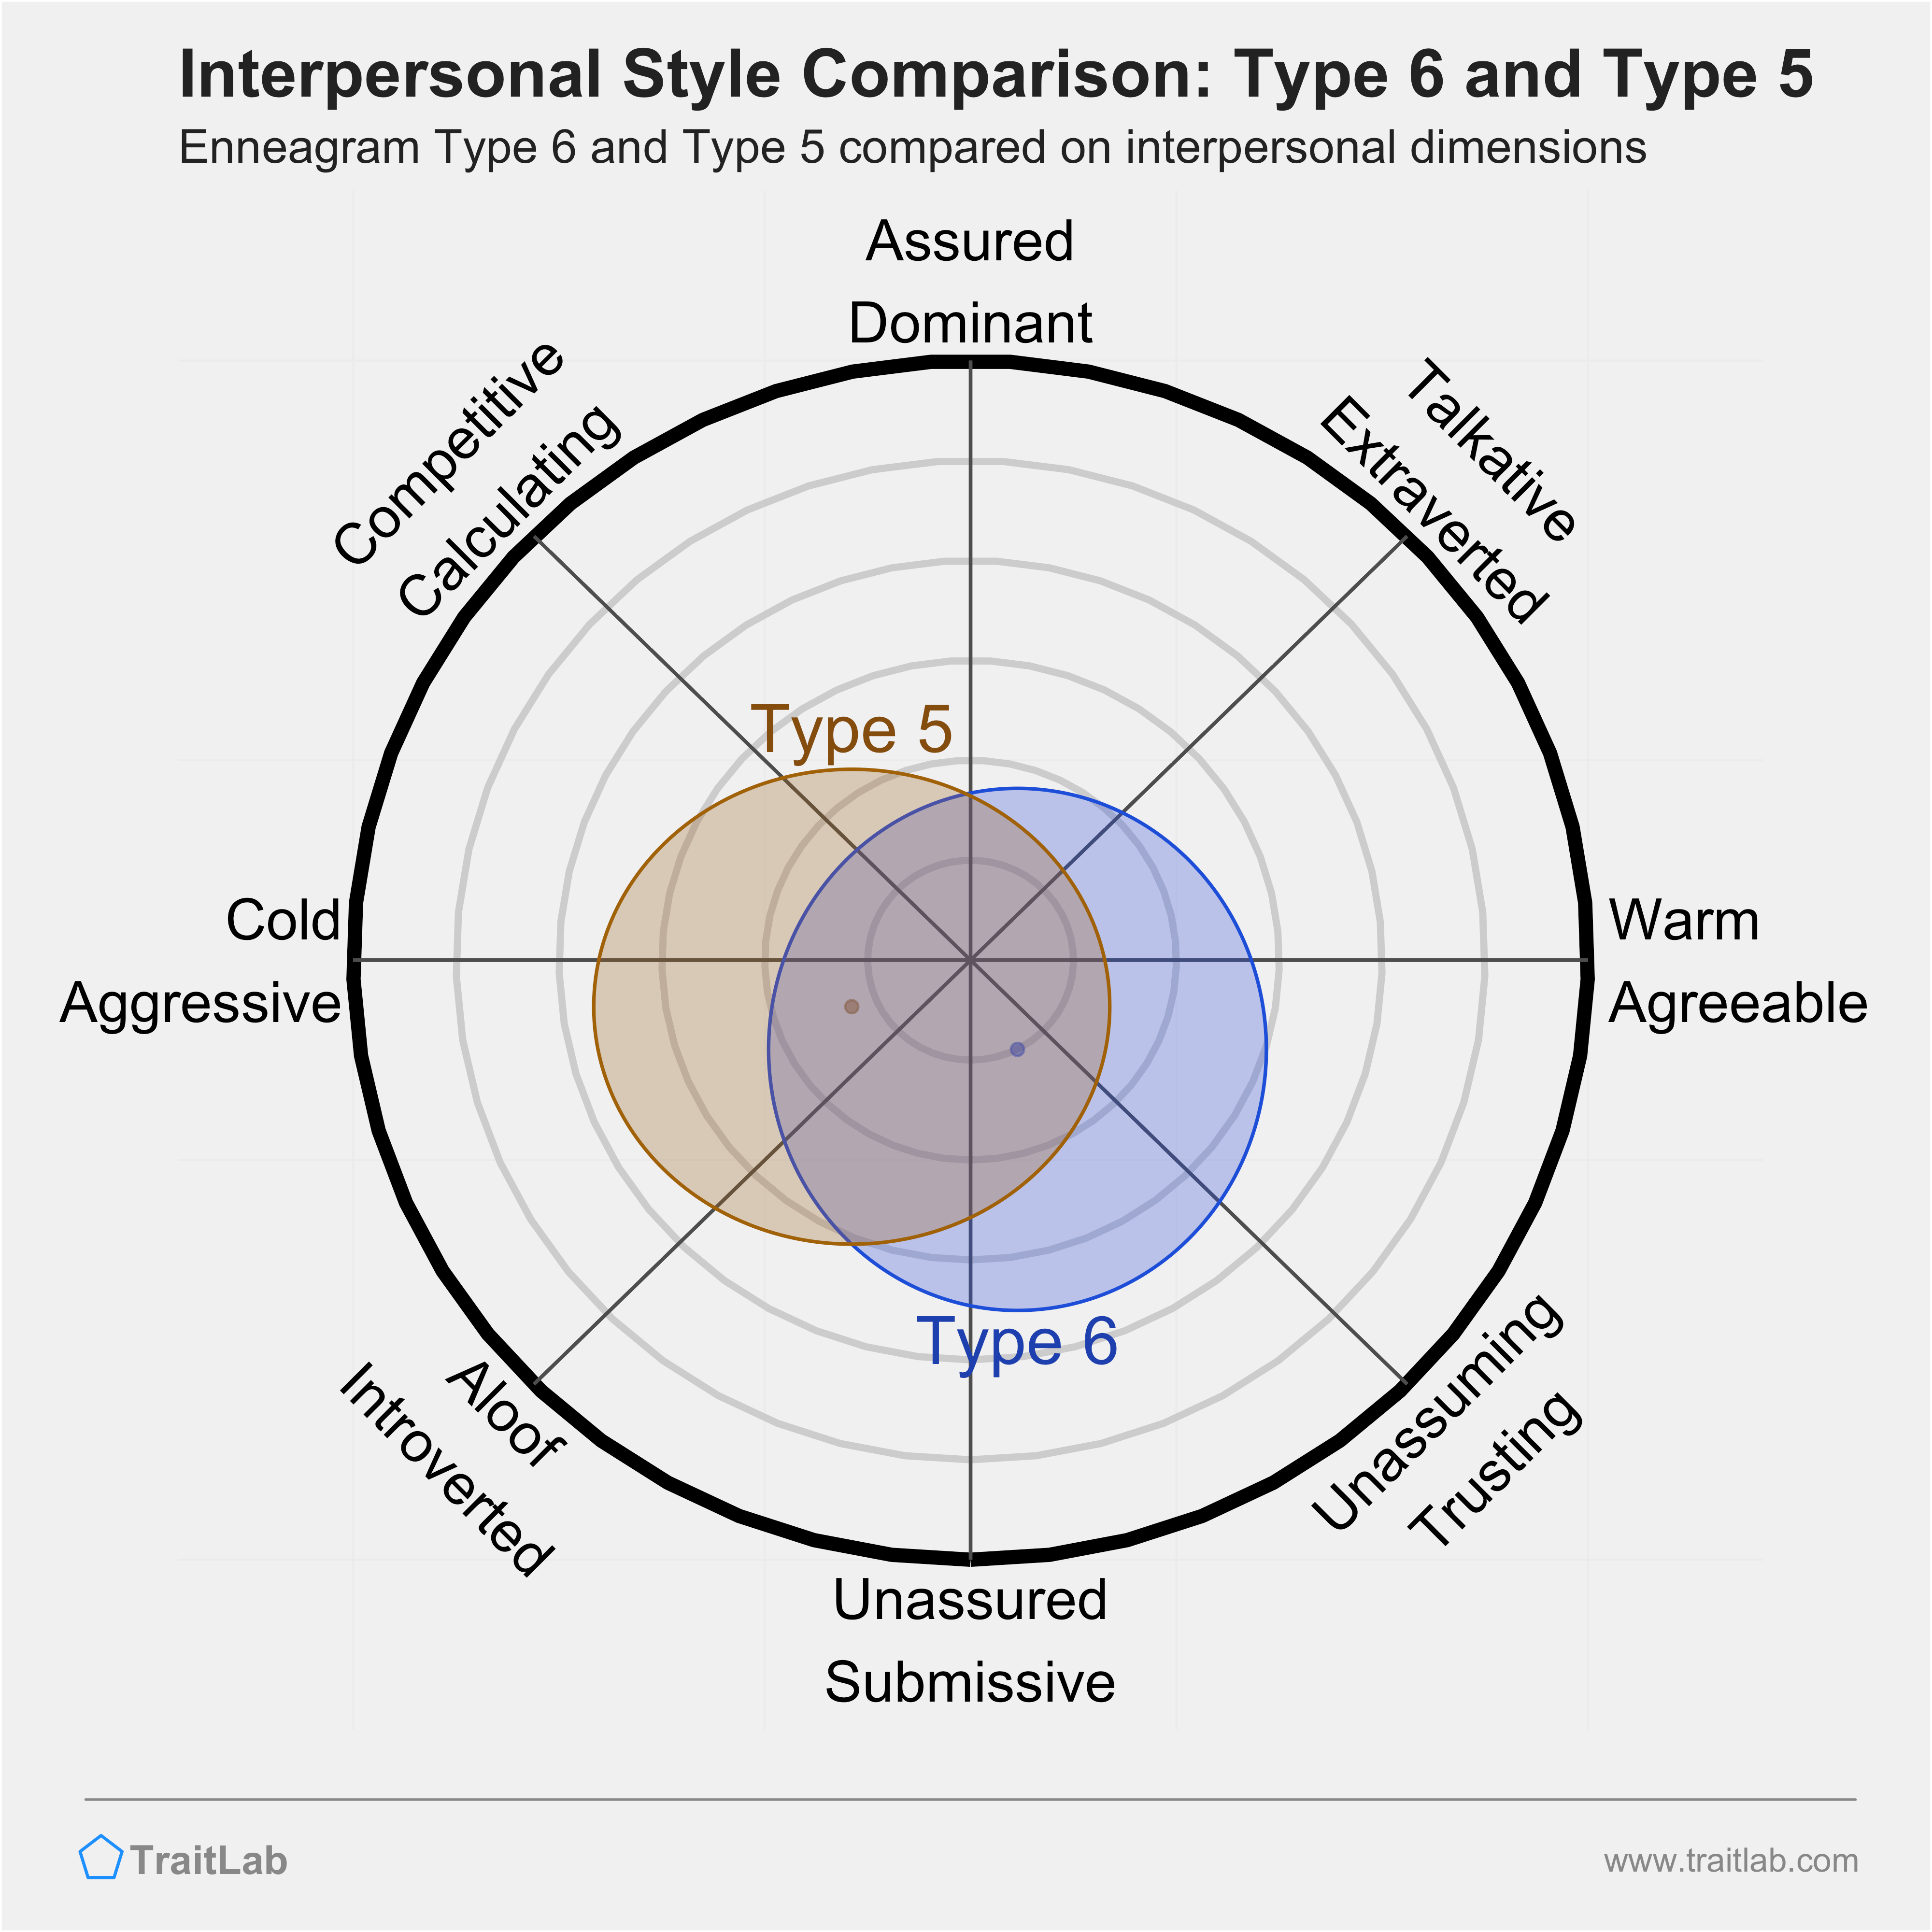 Enneagram Type 6 and Type 5 comparison across interpersonal dimensions